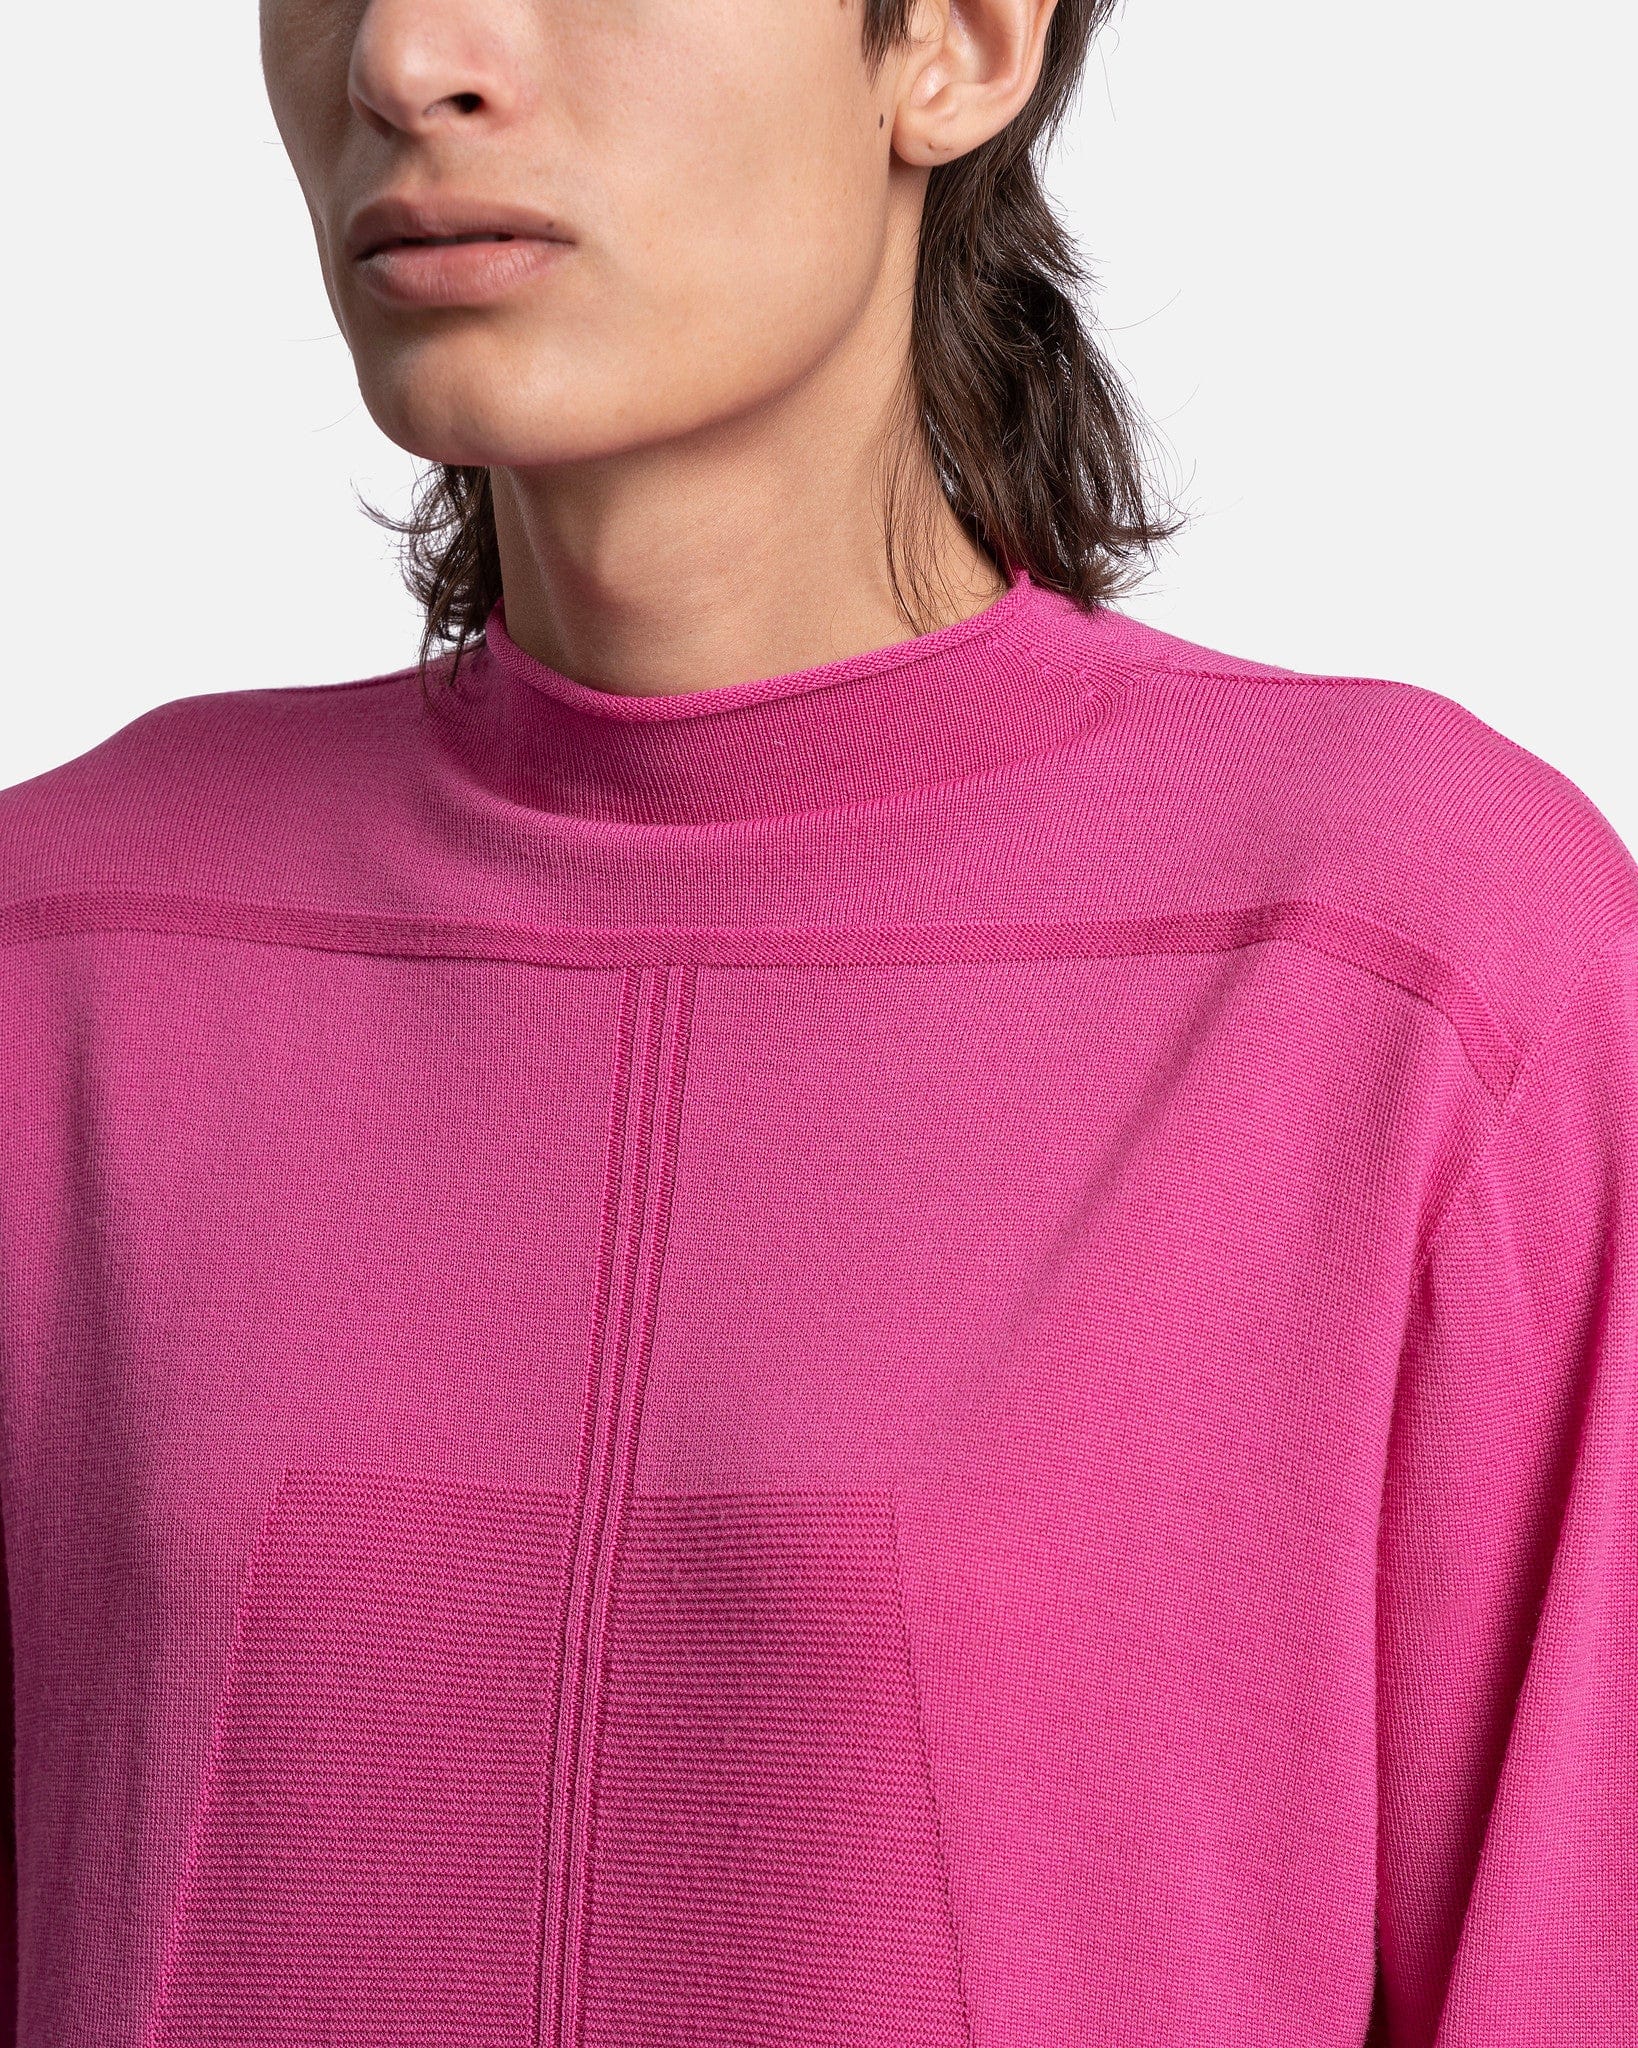 Rick Owens Men's Sweater O/S Oversized Geo Round Neck Sweater in Hot Pink